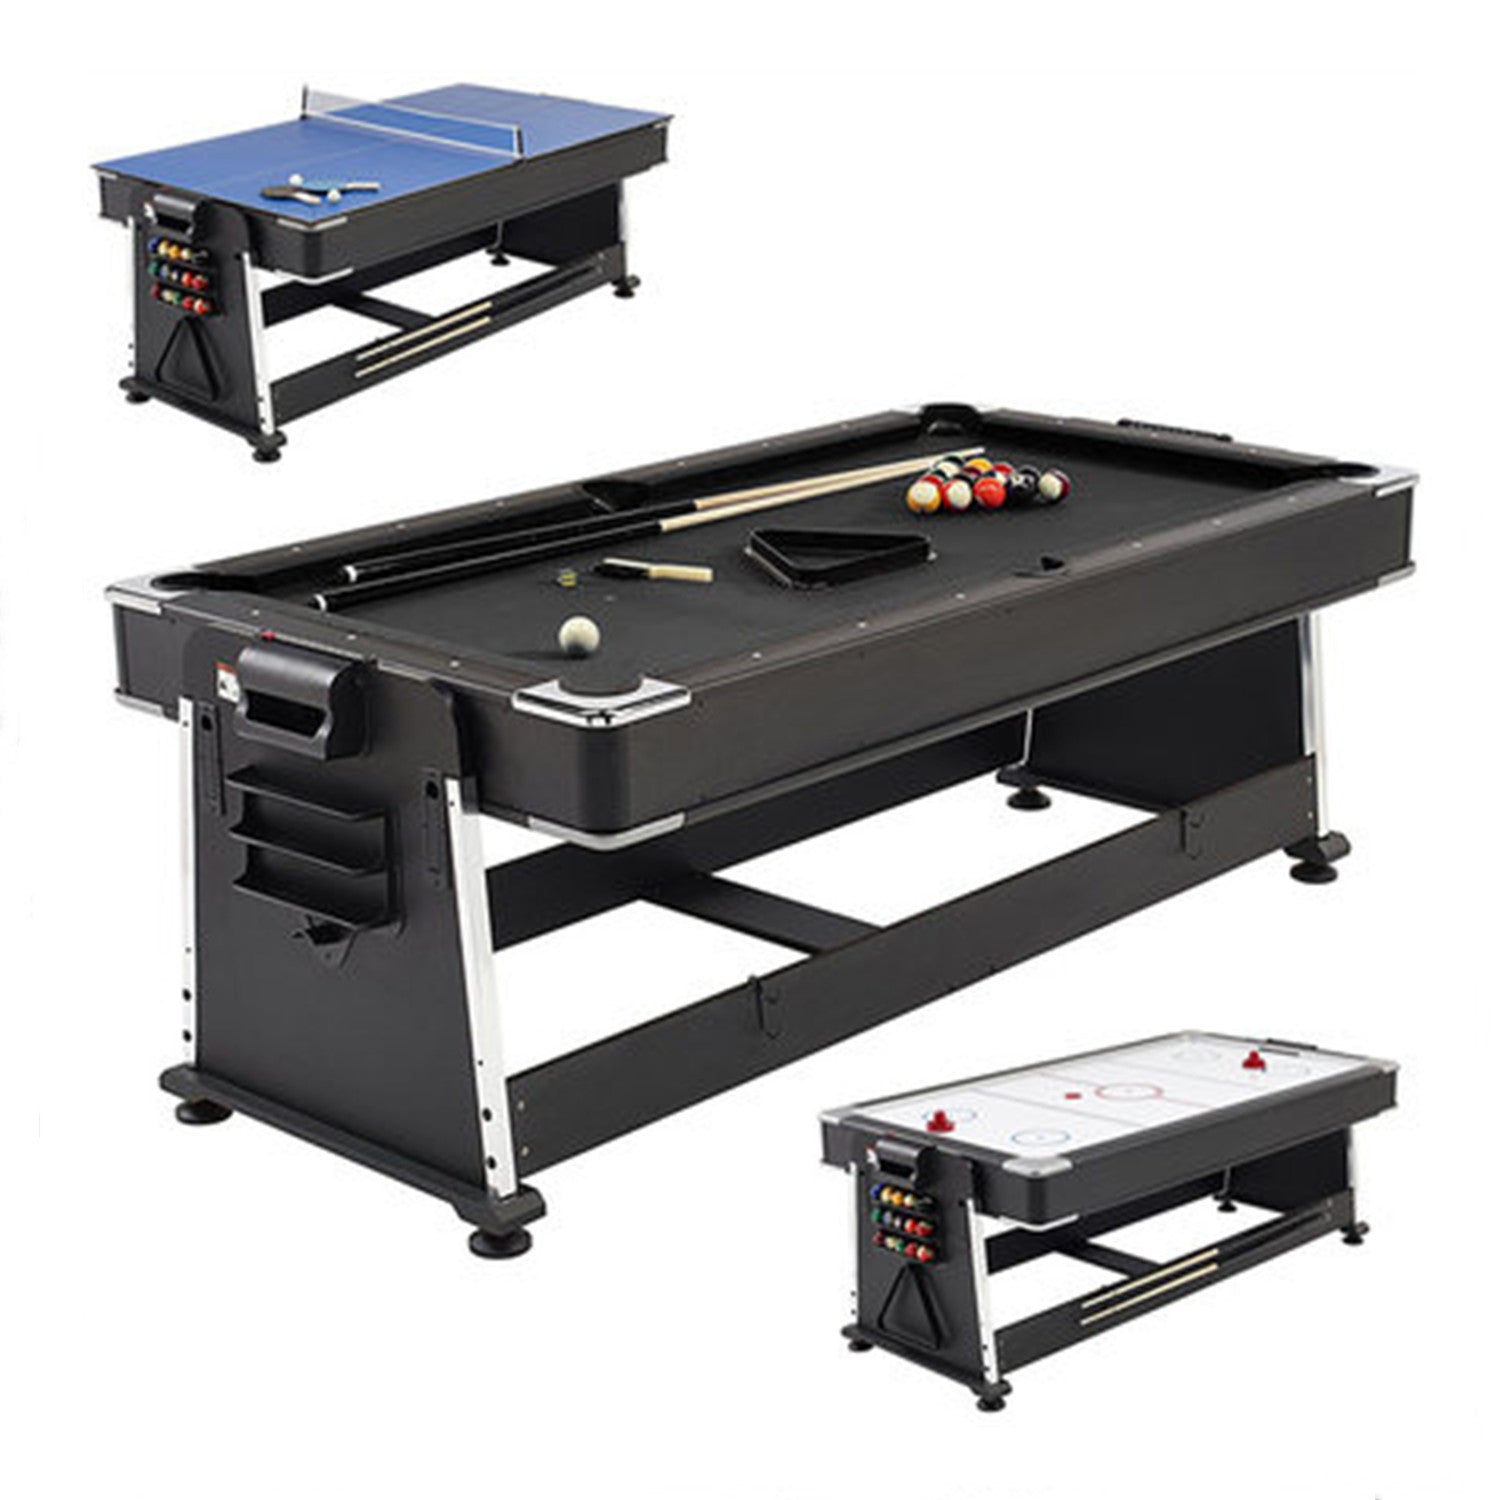 7FT 4IN1 Convertible Pool Table-Black